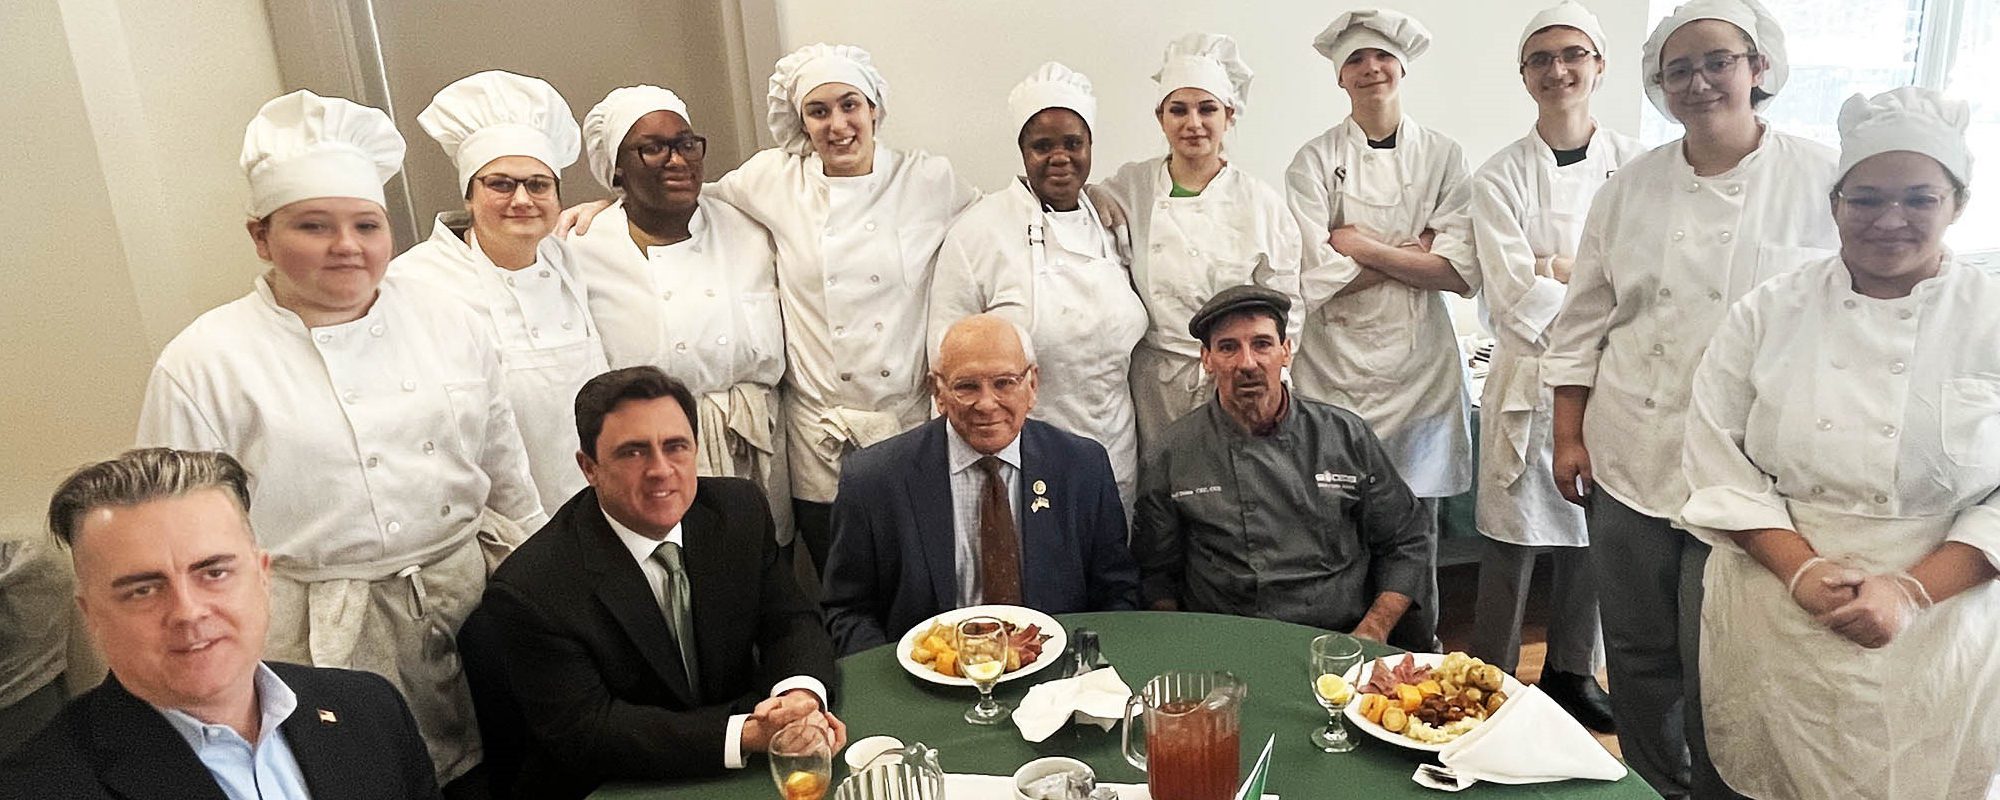 A dozen culinary students in white aprons and hats stand behind politicians who were served food on top of a table draped with a green tablecloth.